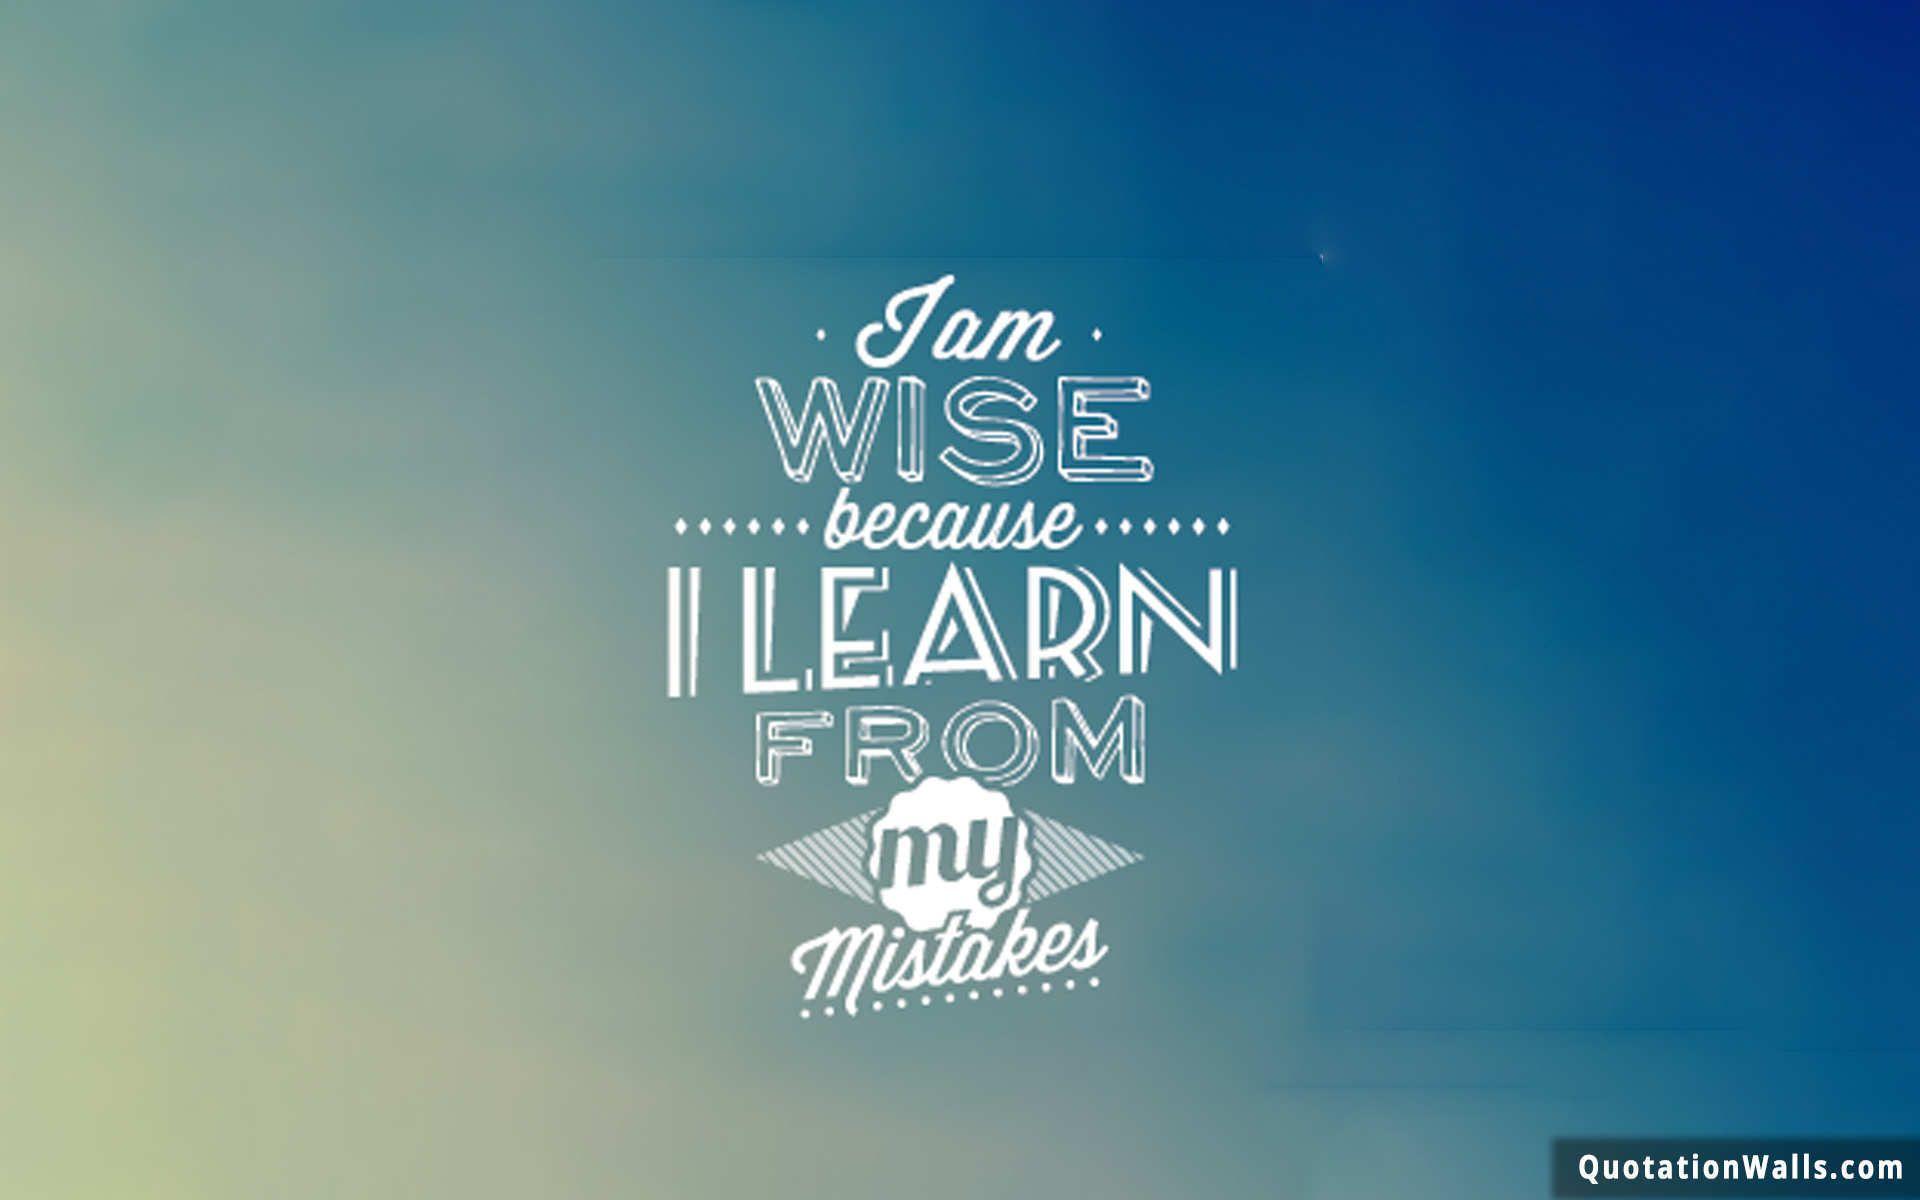 Learning Quotes Image & Wallpaper For desktop. Picture, desktop Background HD, Photo, Free Download